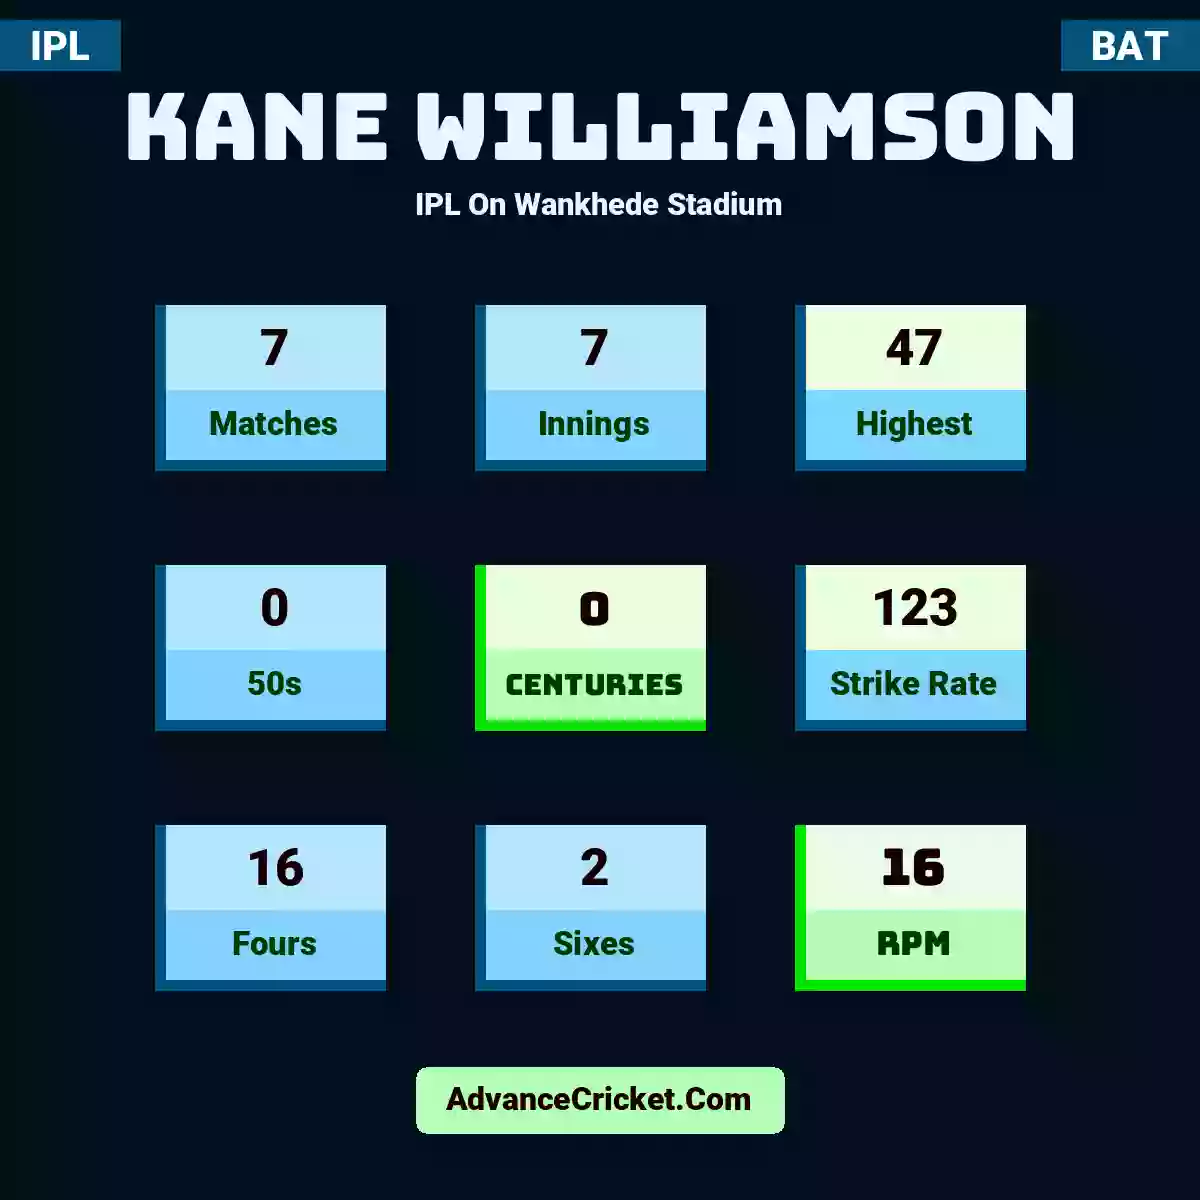 Kane Williamson IPL  On Wankhede Stadium, Kane Williamson played 7 matches, scored 47 runs as highest, 0 half-centuries, and 0 centuries, with a strike rate of 123. K.Williamson hit 16 fours and 2 sixes, with an RPM of 16.